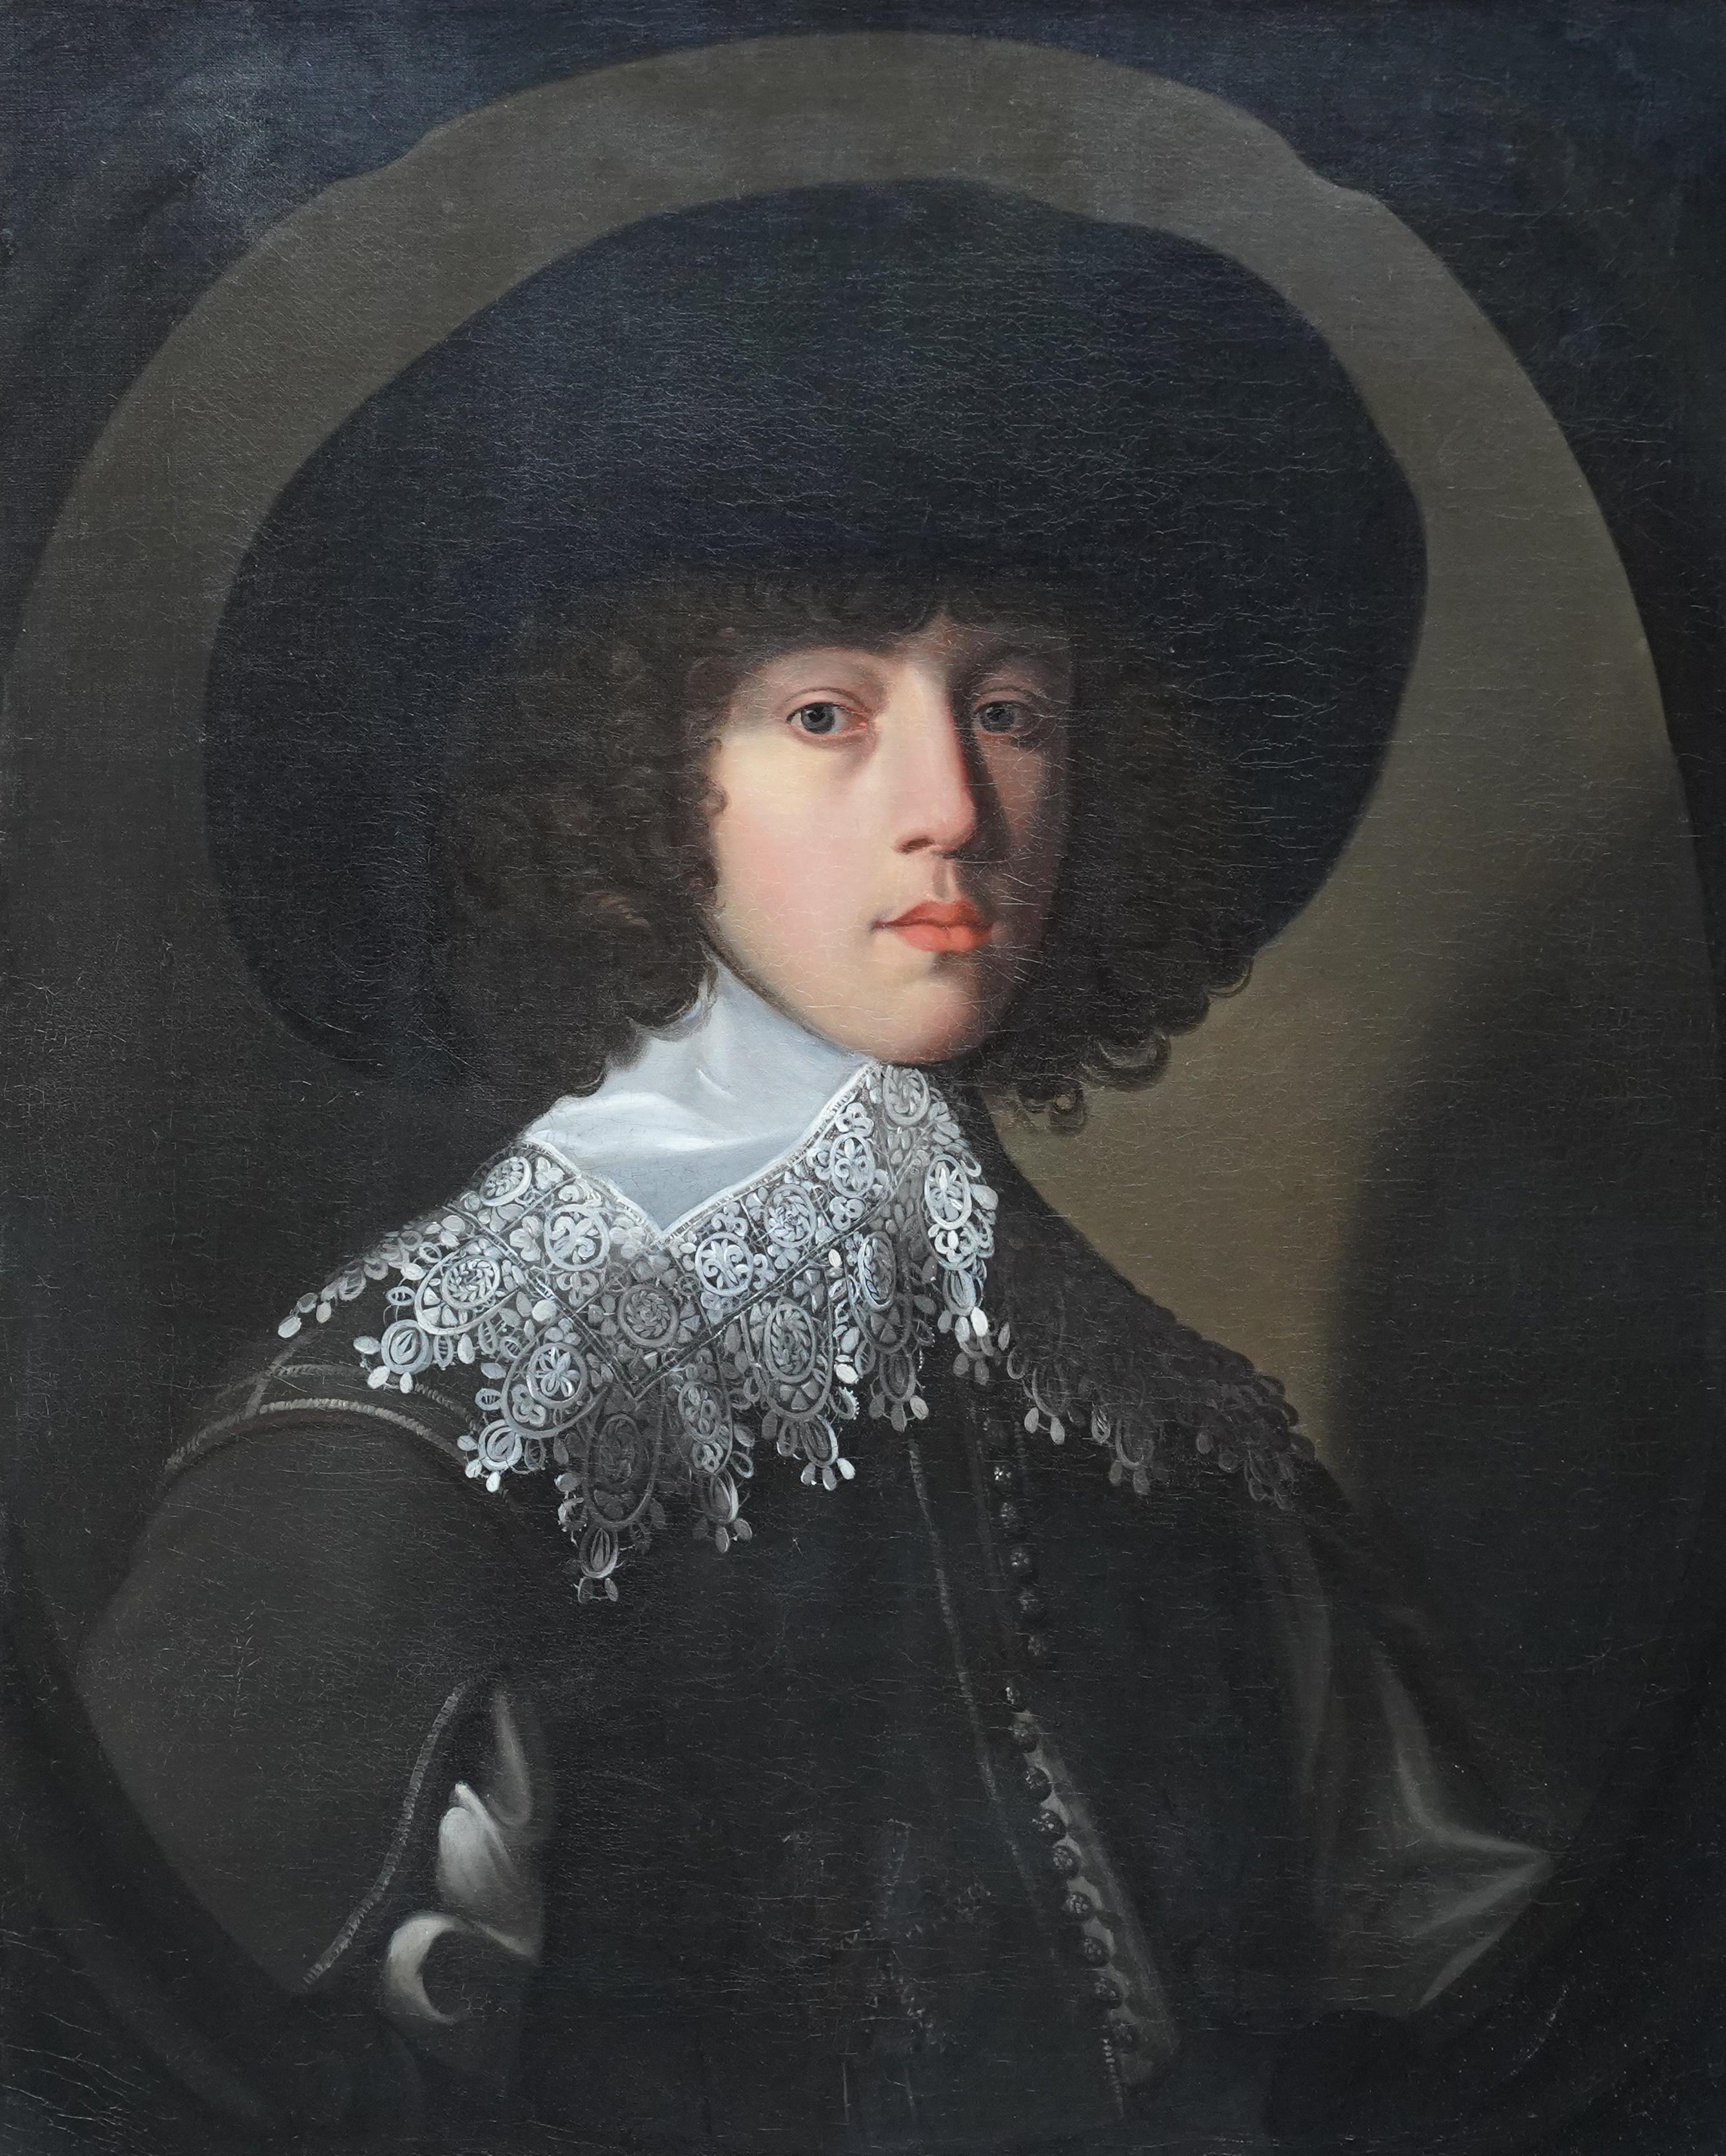 Portrait of a Young Gentleman - Dutch Old Master 17thC art portrait oil painting - Painting by Gerrard van Honthorst